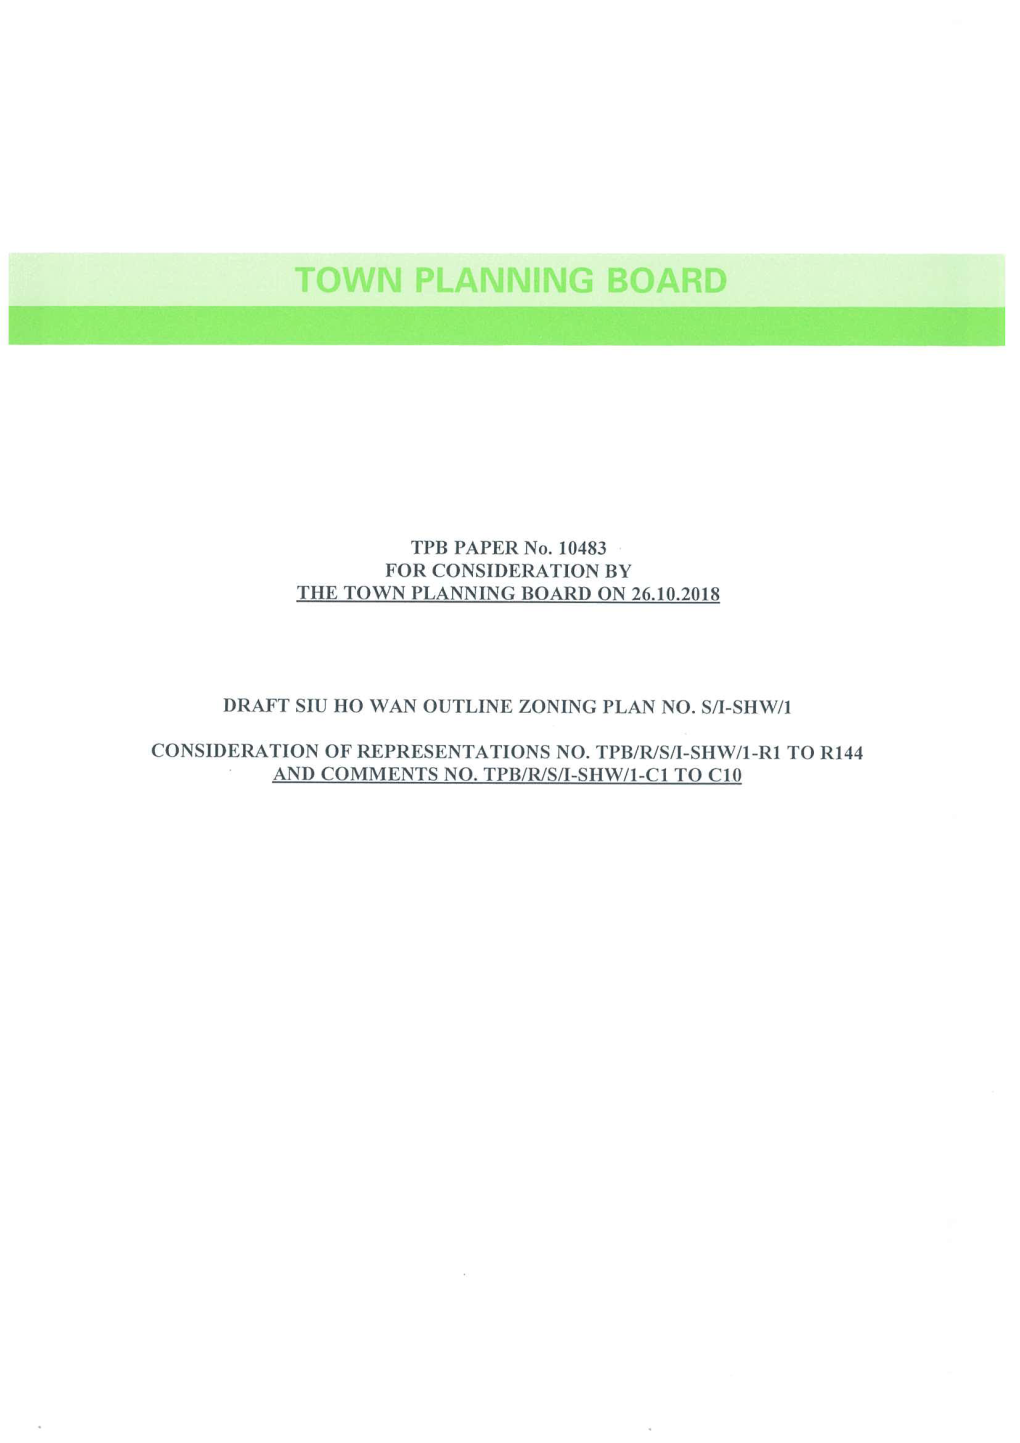 Town Planning Board Paper No. 10483